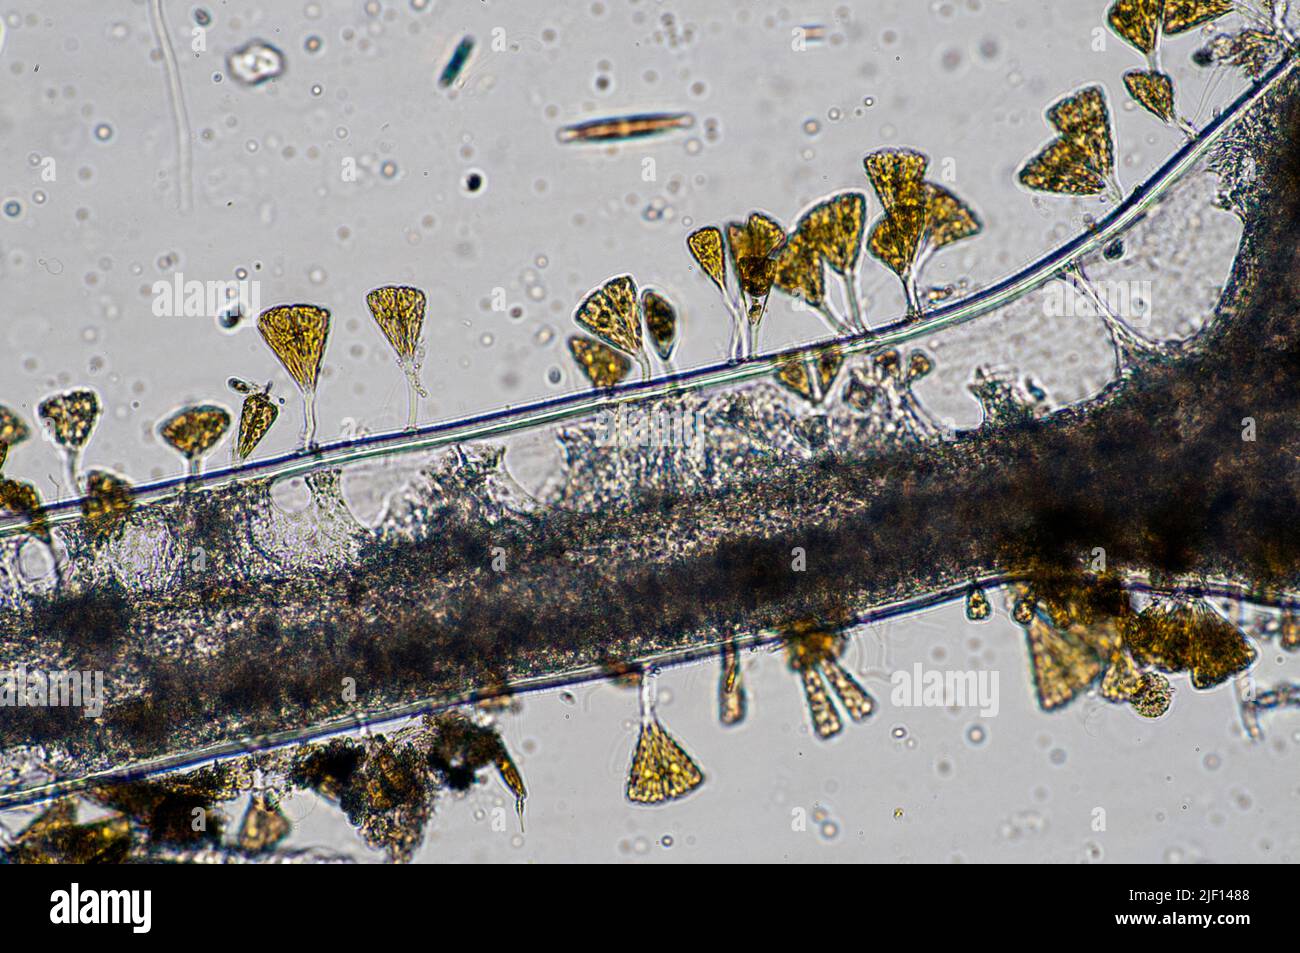 Pennate diatoms from the genus Licmophora typically growing epiphytic on other microscopic algae. Stock Photo